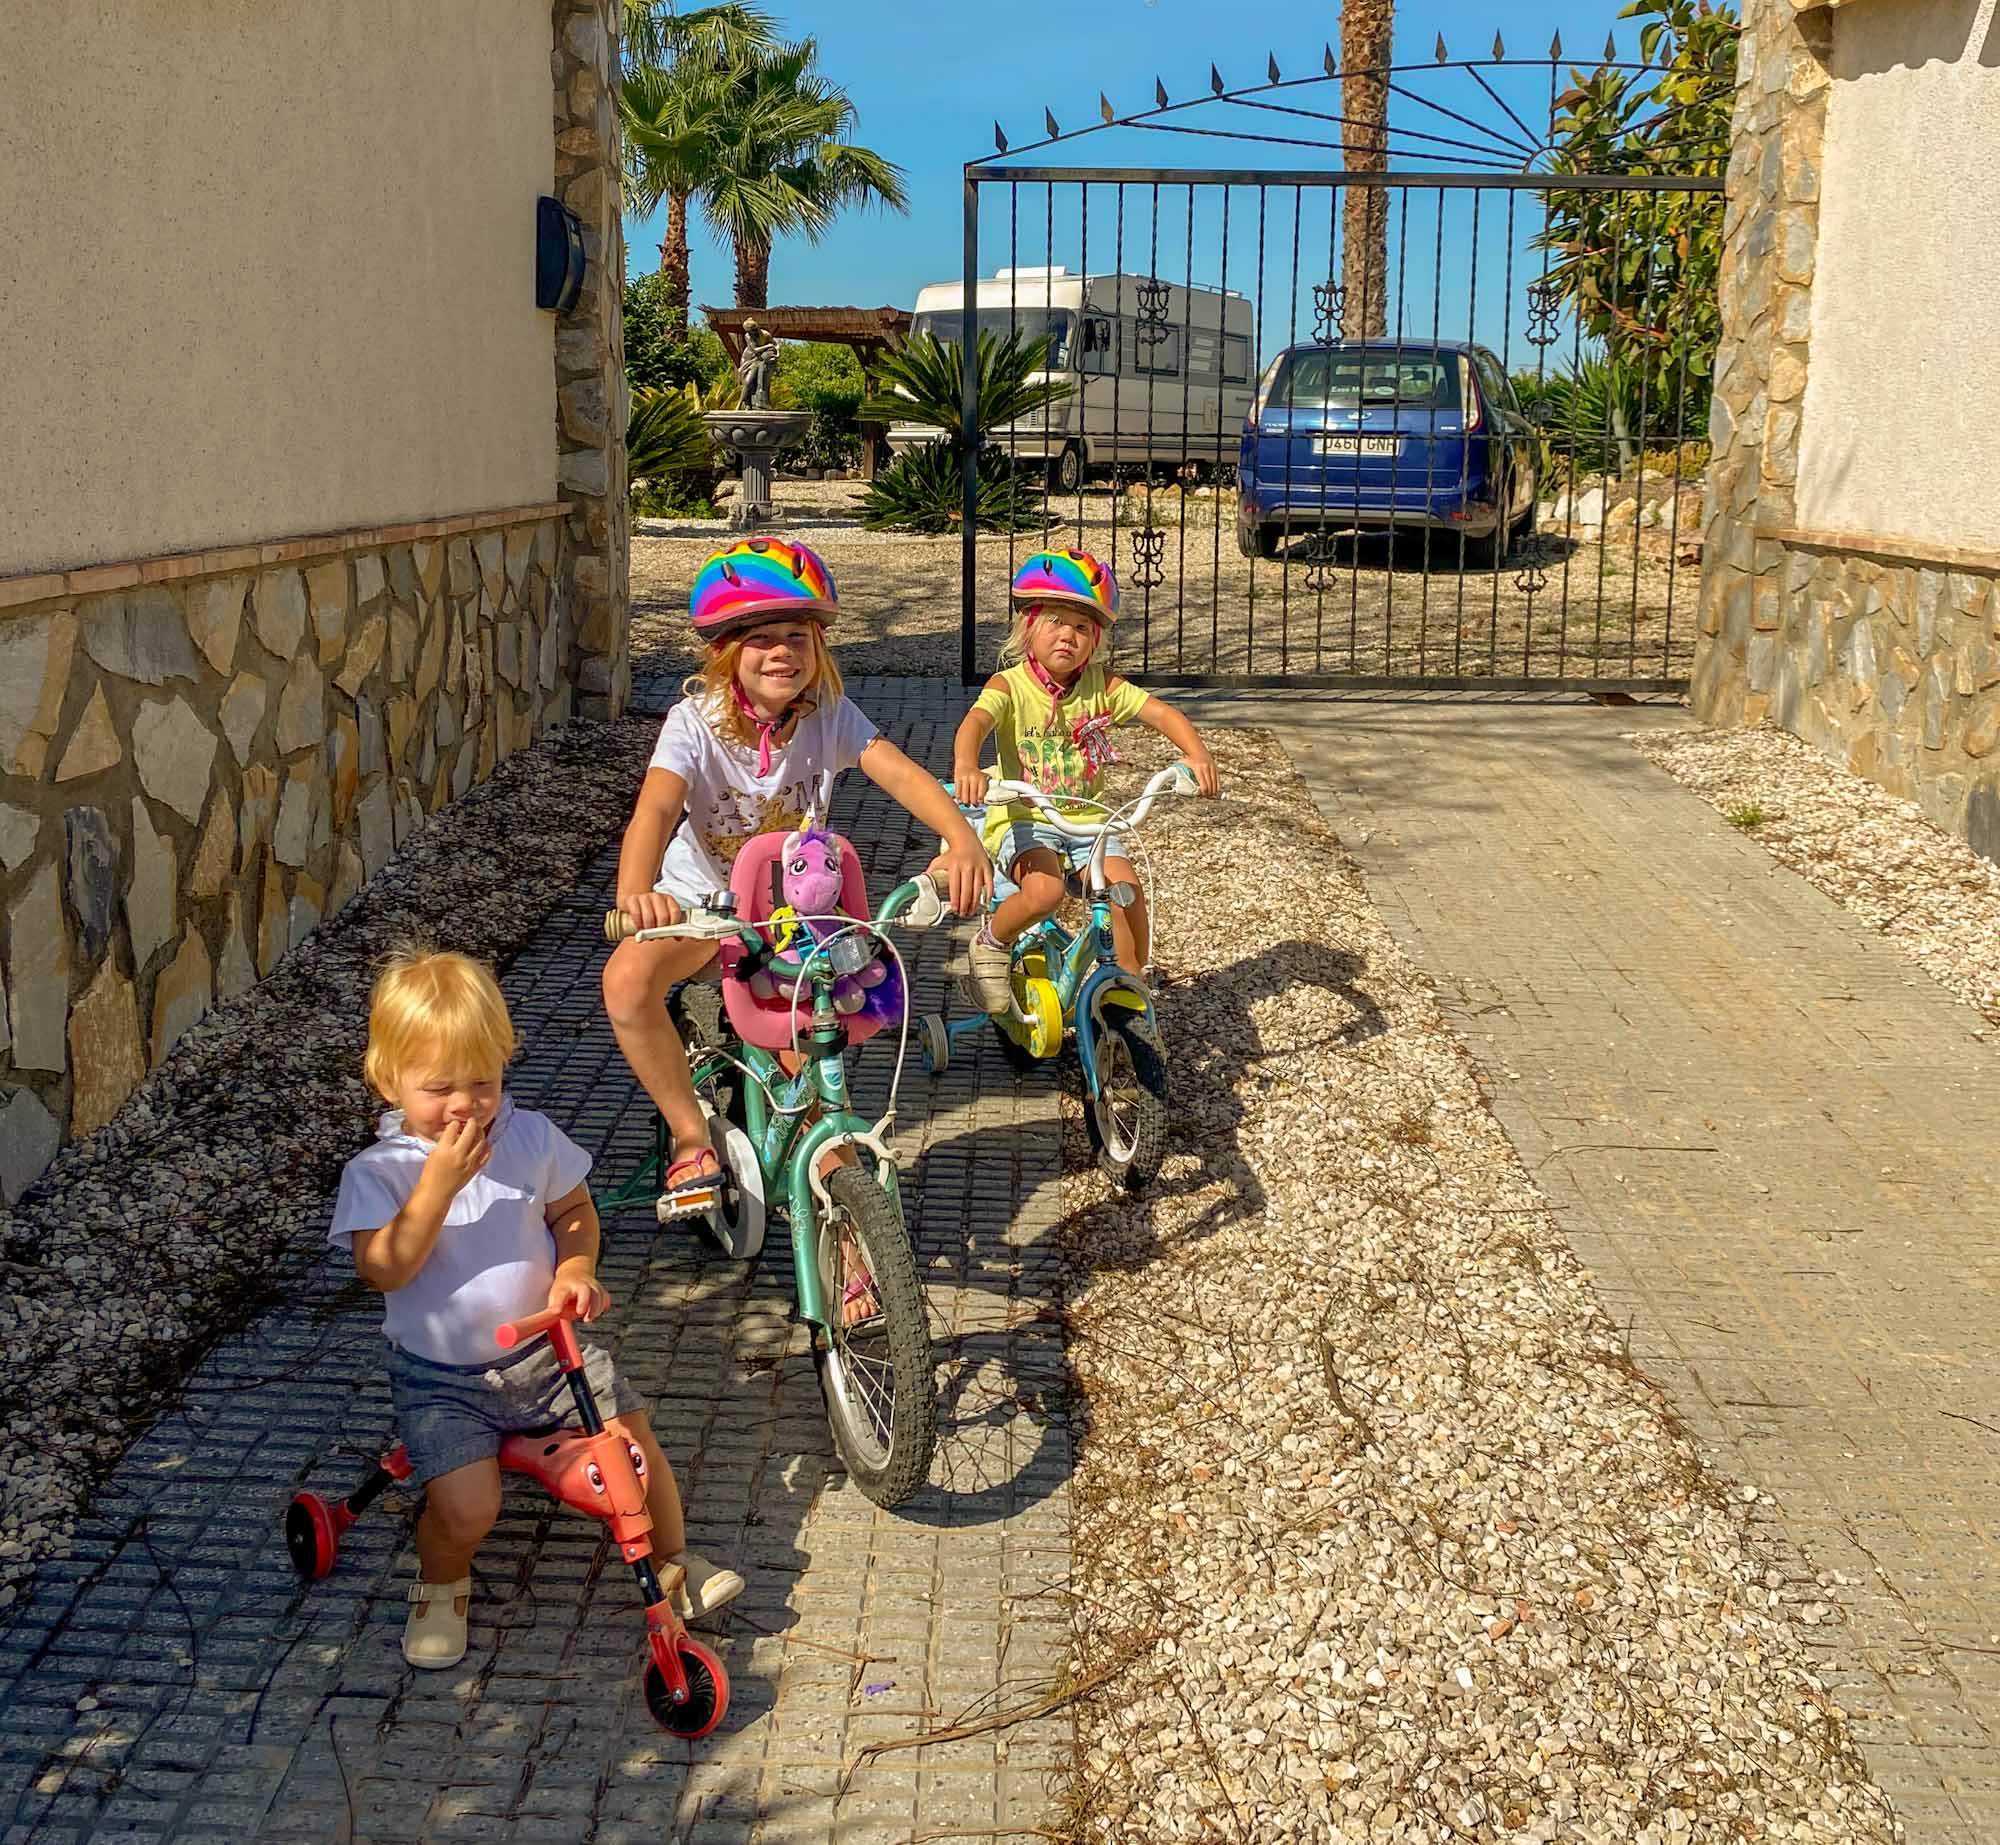 3 small children on their bikes ready for a ride